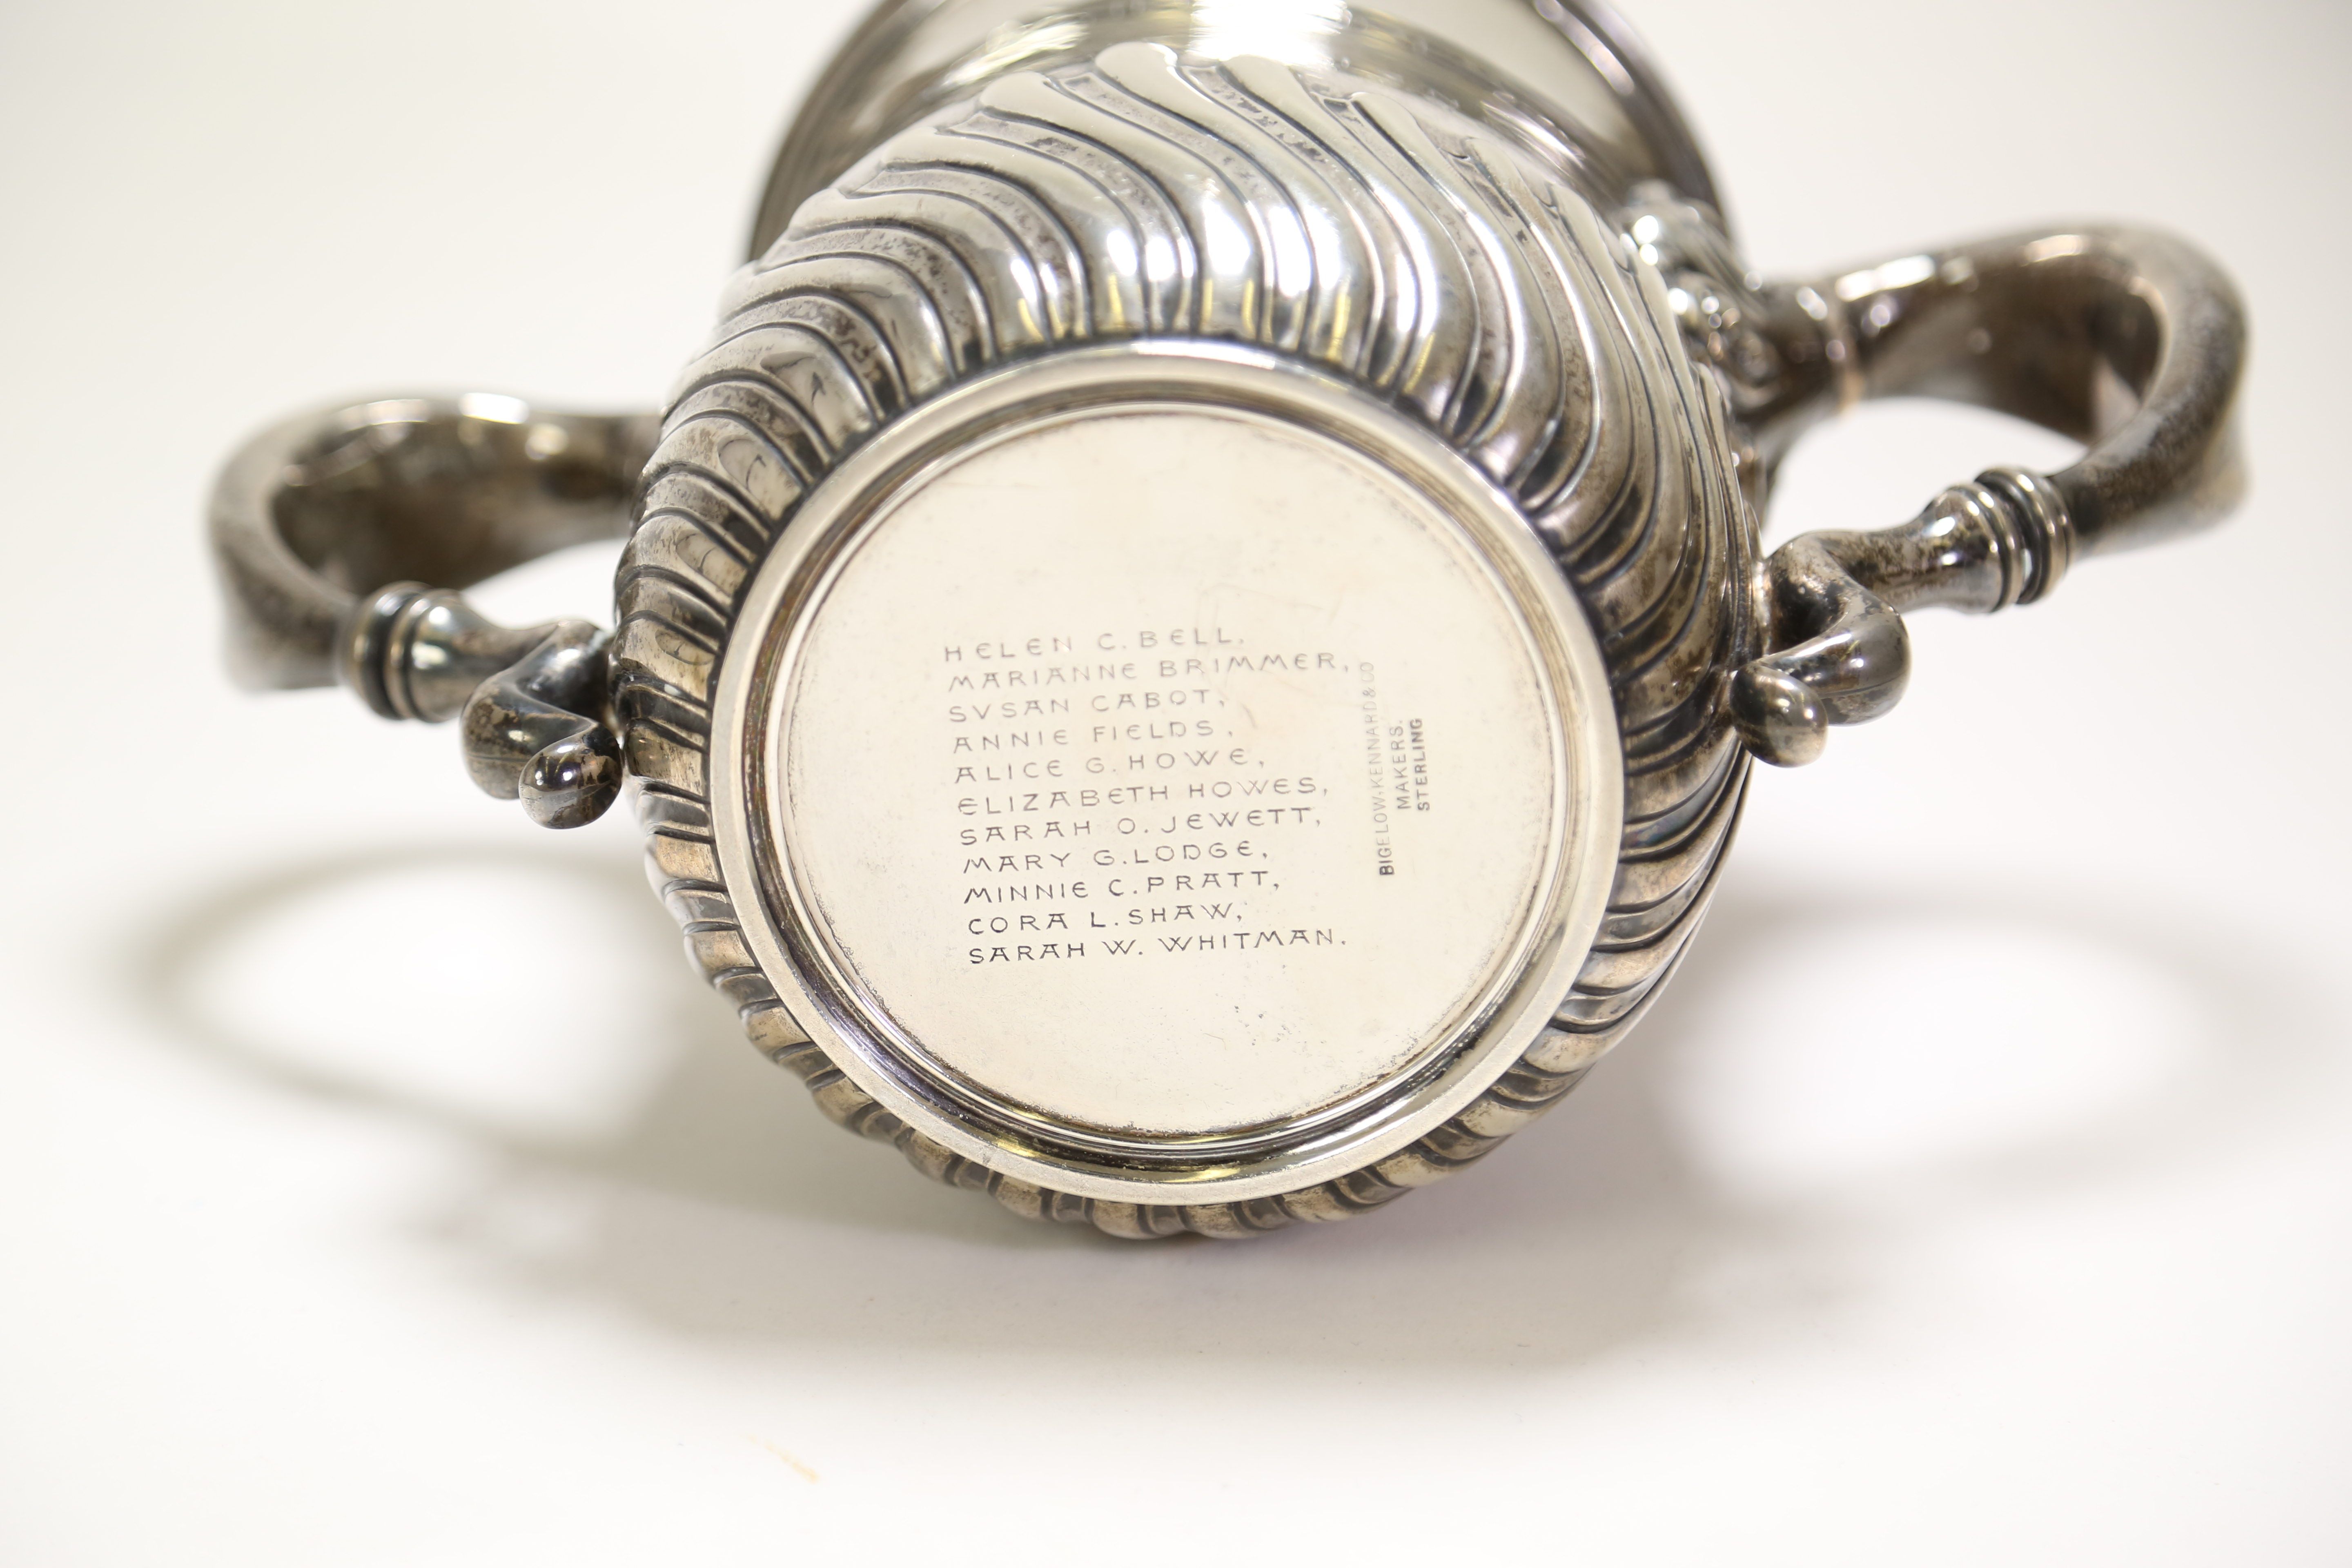 Bottom of silver friendship cup showing a sterling makers mark from Bigelow, Kennard & Co., and the names of 11 people: Helen C. Bell, Marianne Brimmer, Susan Cabot, Annie Fields, Alice G. Howe, Elizabeth Howes, Sarah O. Jewett, Mary G. Lodge, Minnie C. Pratt, Cora L. Shaw, and Sarah W. Whitman